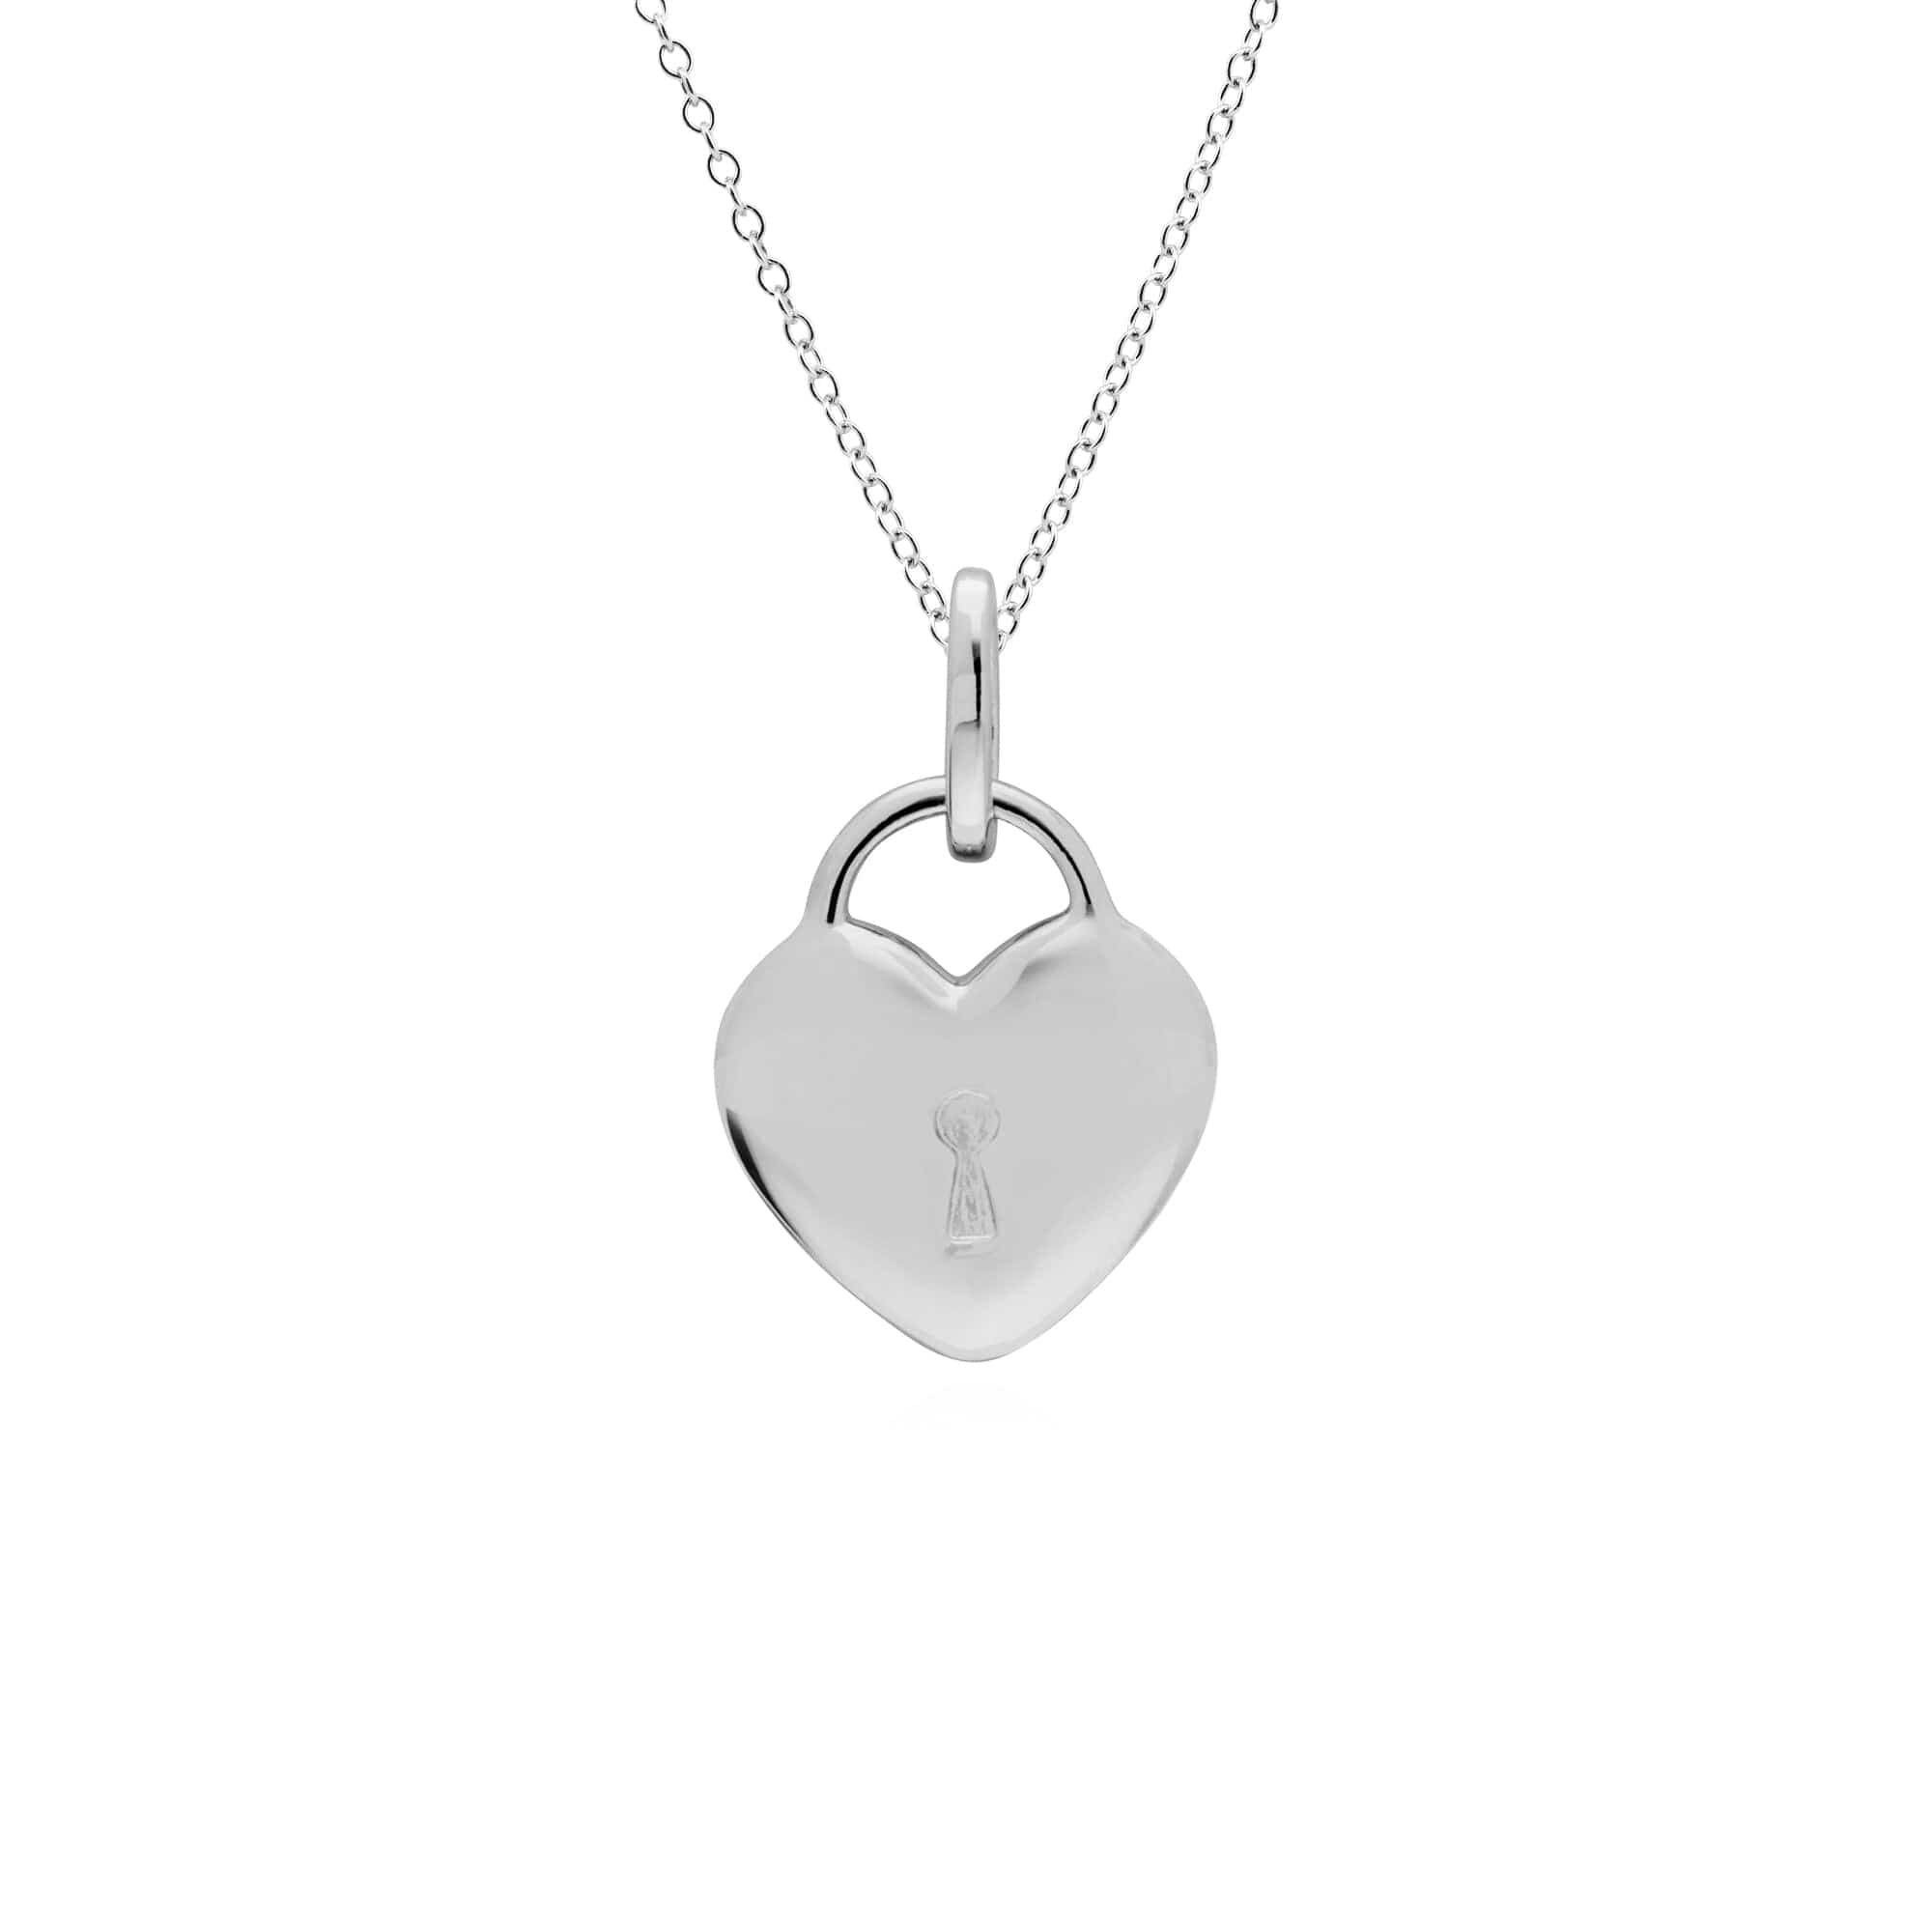 270P027501925-270P027001925 Classic Heart Lock Pendant & Jade Key Charm in 925 Sterling Silver 3